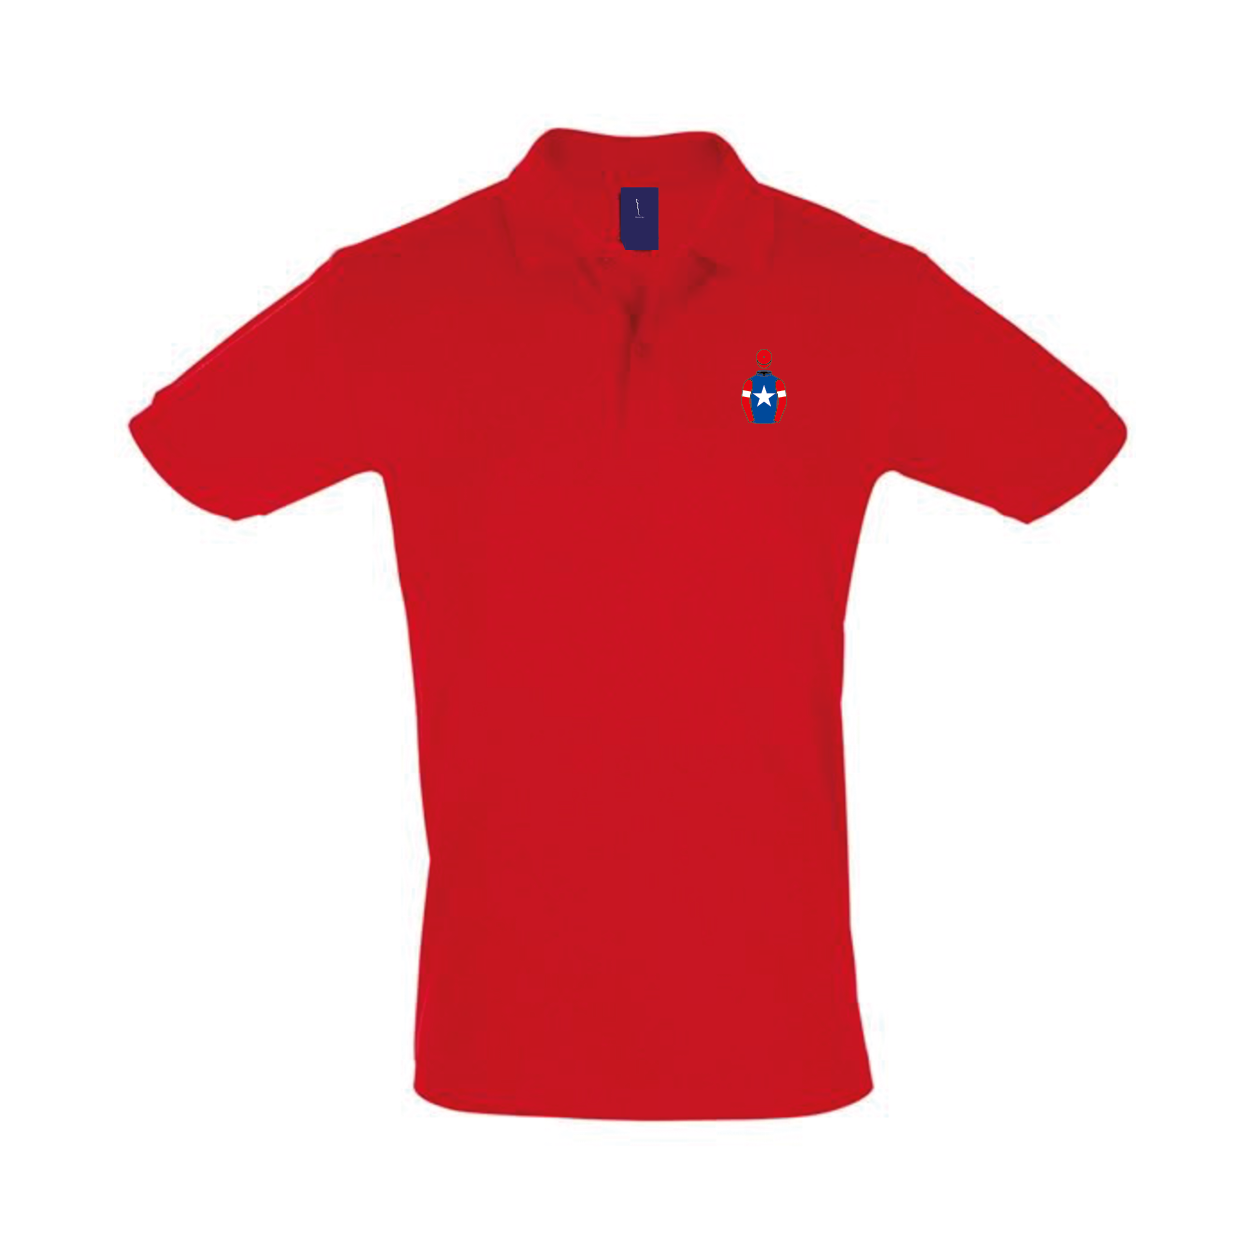 Ladies The Racing Emporium Embroidered Polo Shirt - Clothing - Hacked Up